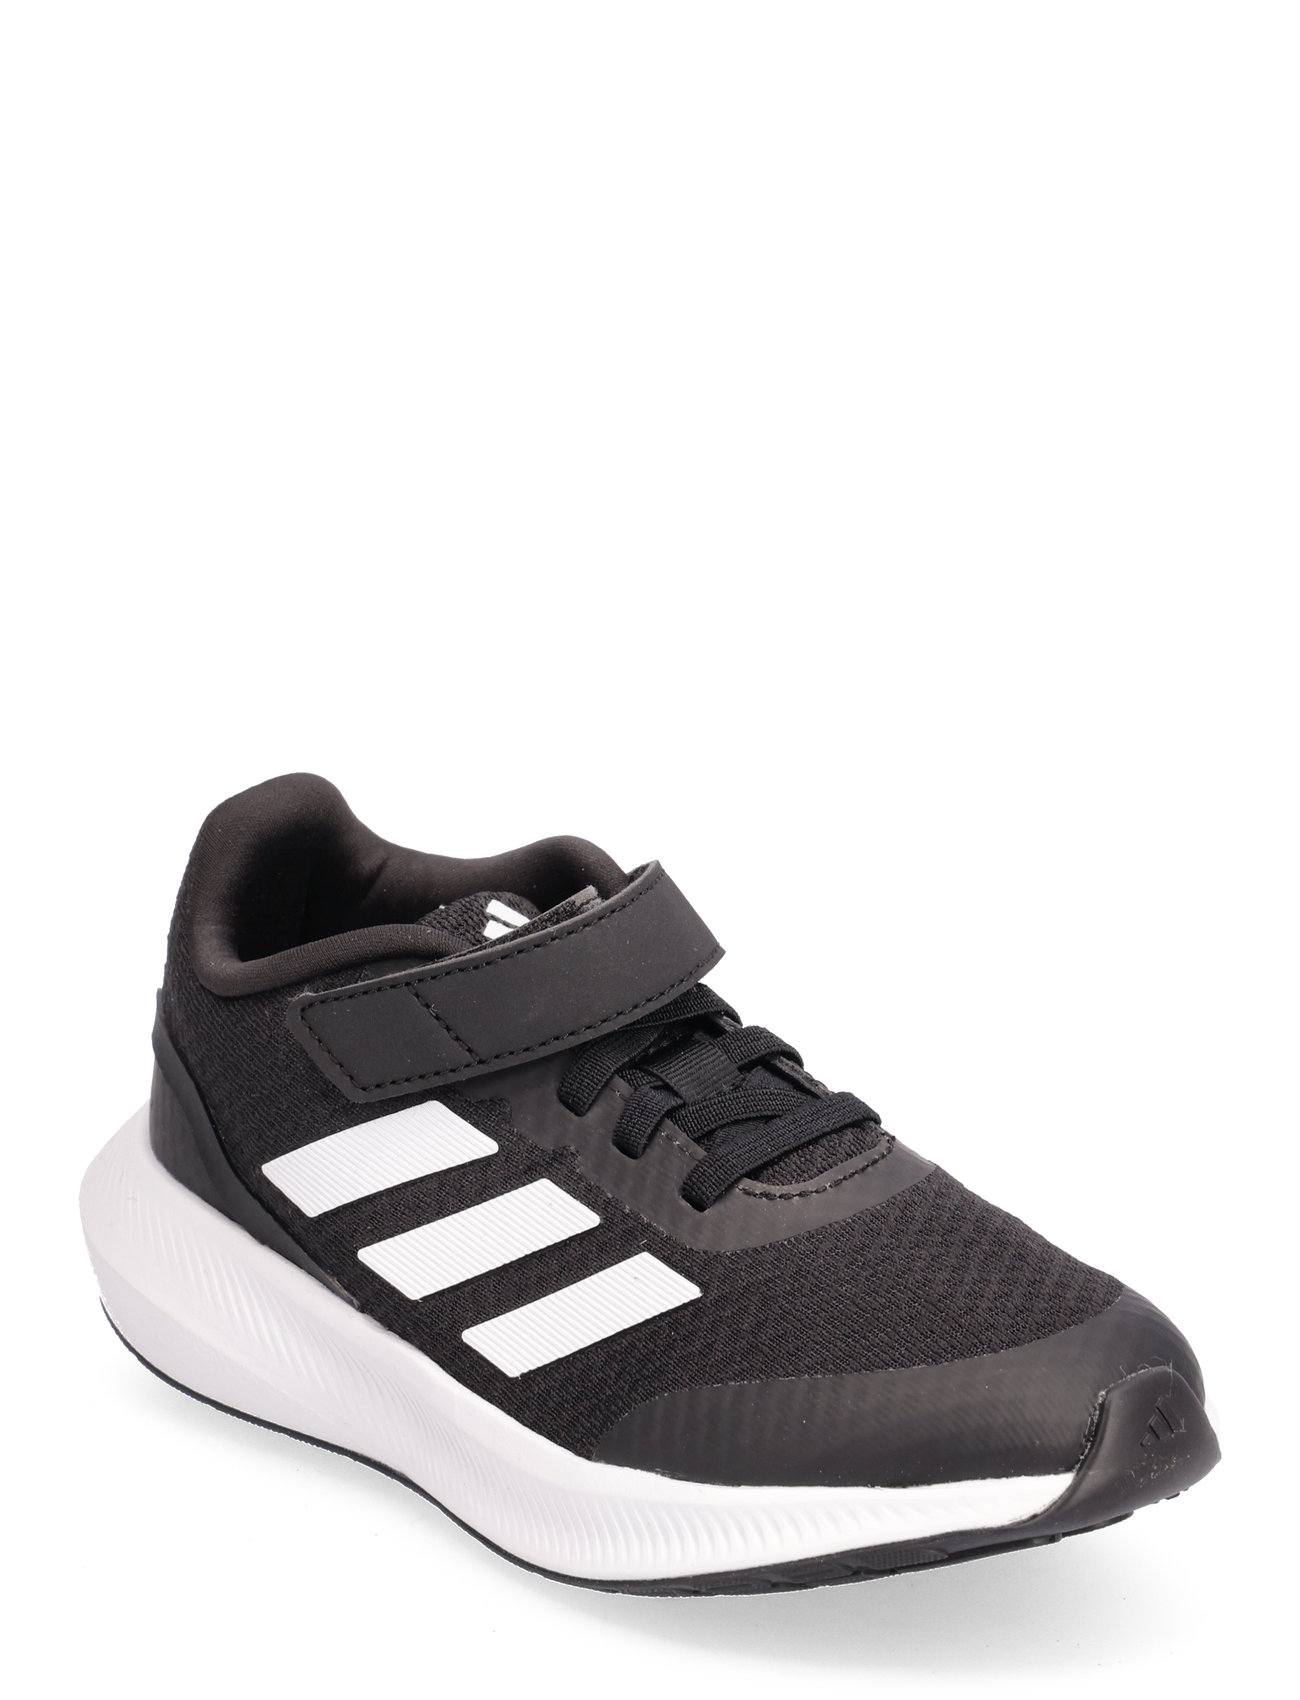 adidas Performance Runfalcon Shoes Top Lace Tops - Elastic Strap Low 3.0